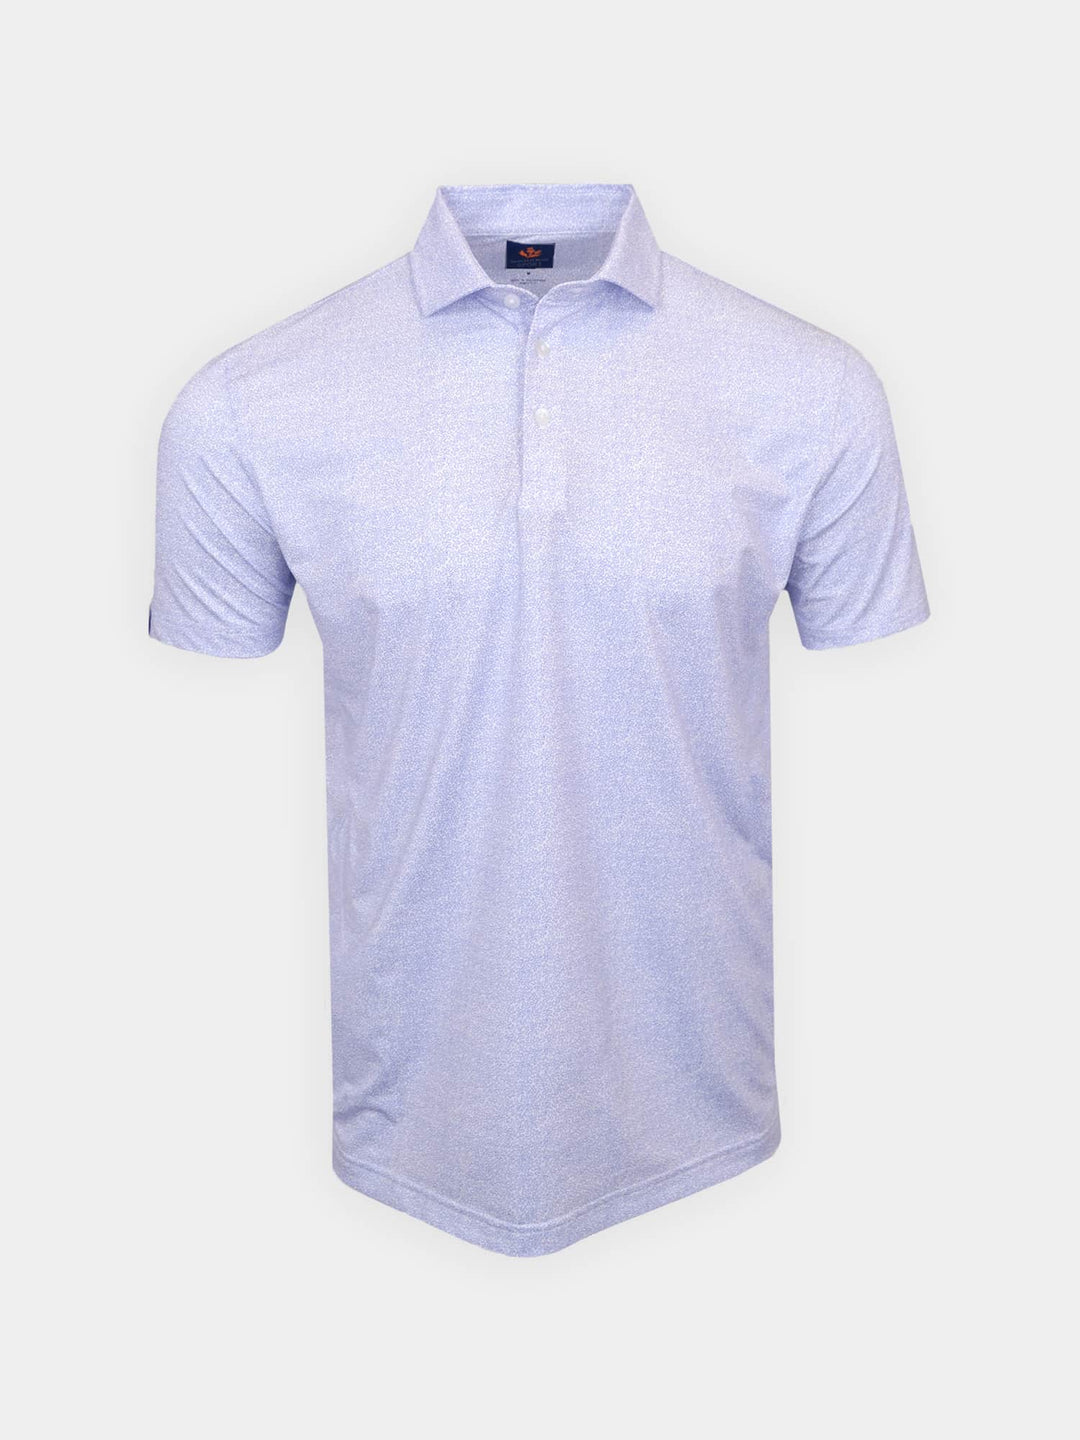 Donald Ross Mens Sport Fit Wallace Polo - WHITE/PERIWINKLE